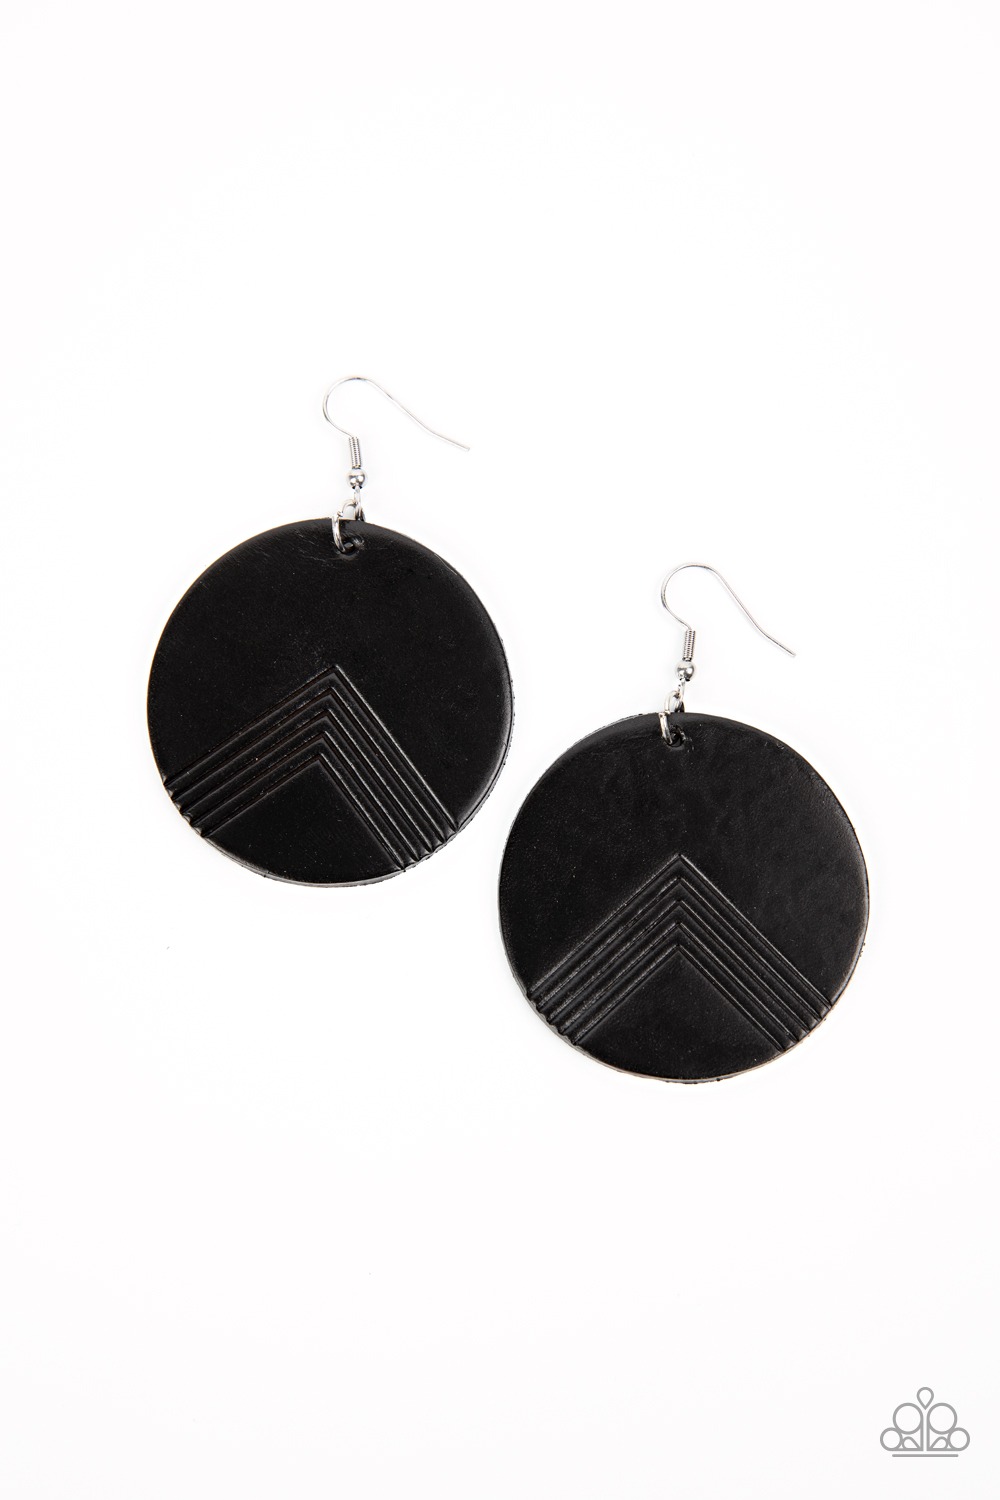 Earring - On the Edge of Edgy - Black